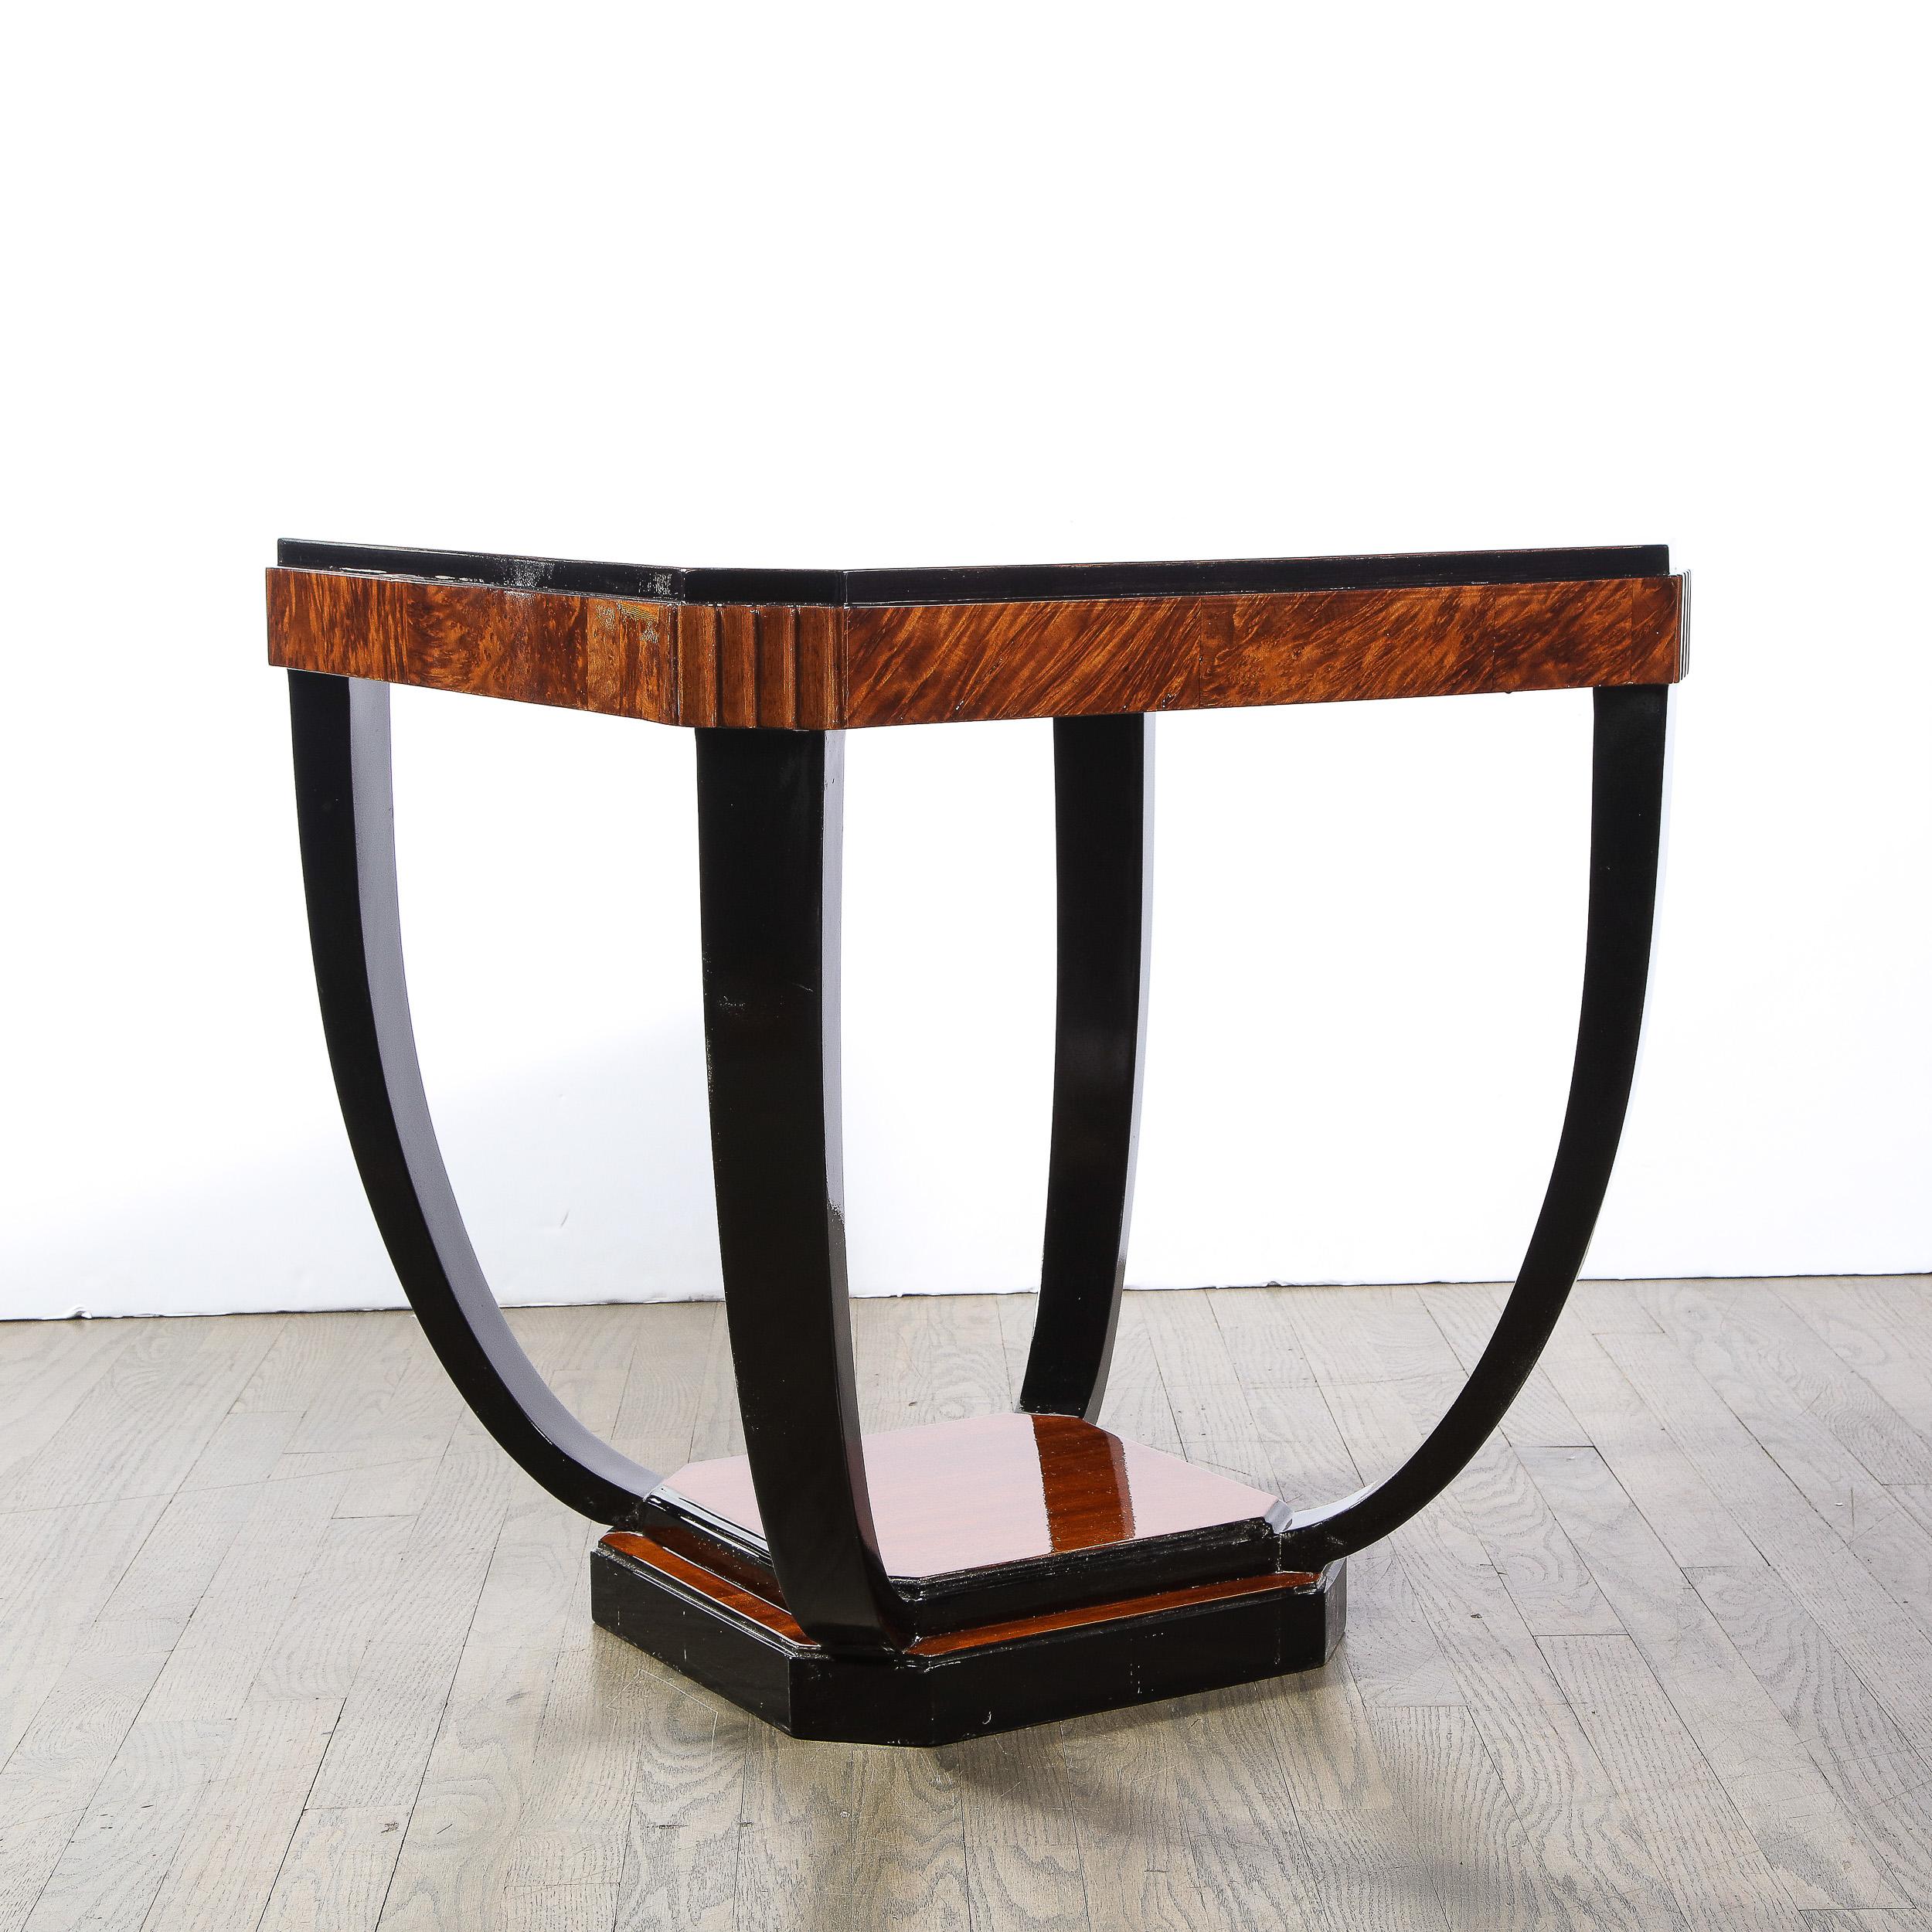 Art Deco Streamlined Cocktail Table in Bookmatched Burled Walnut & Black Lacquer For Sale 6